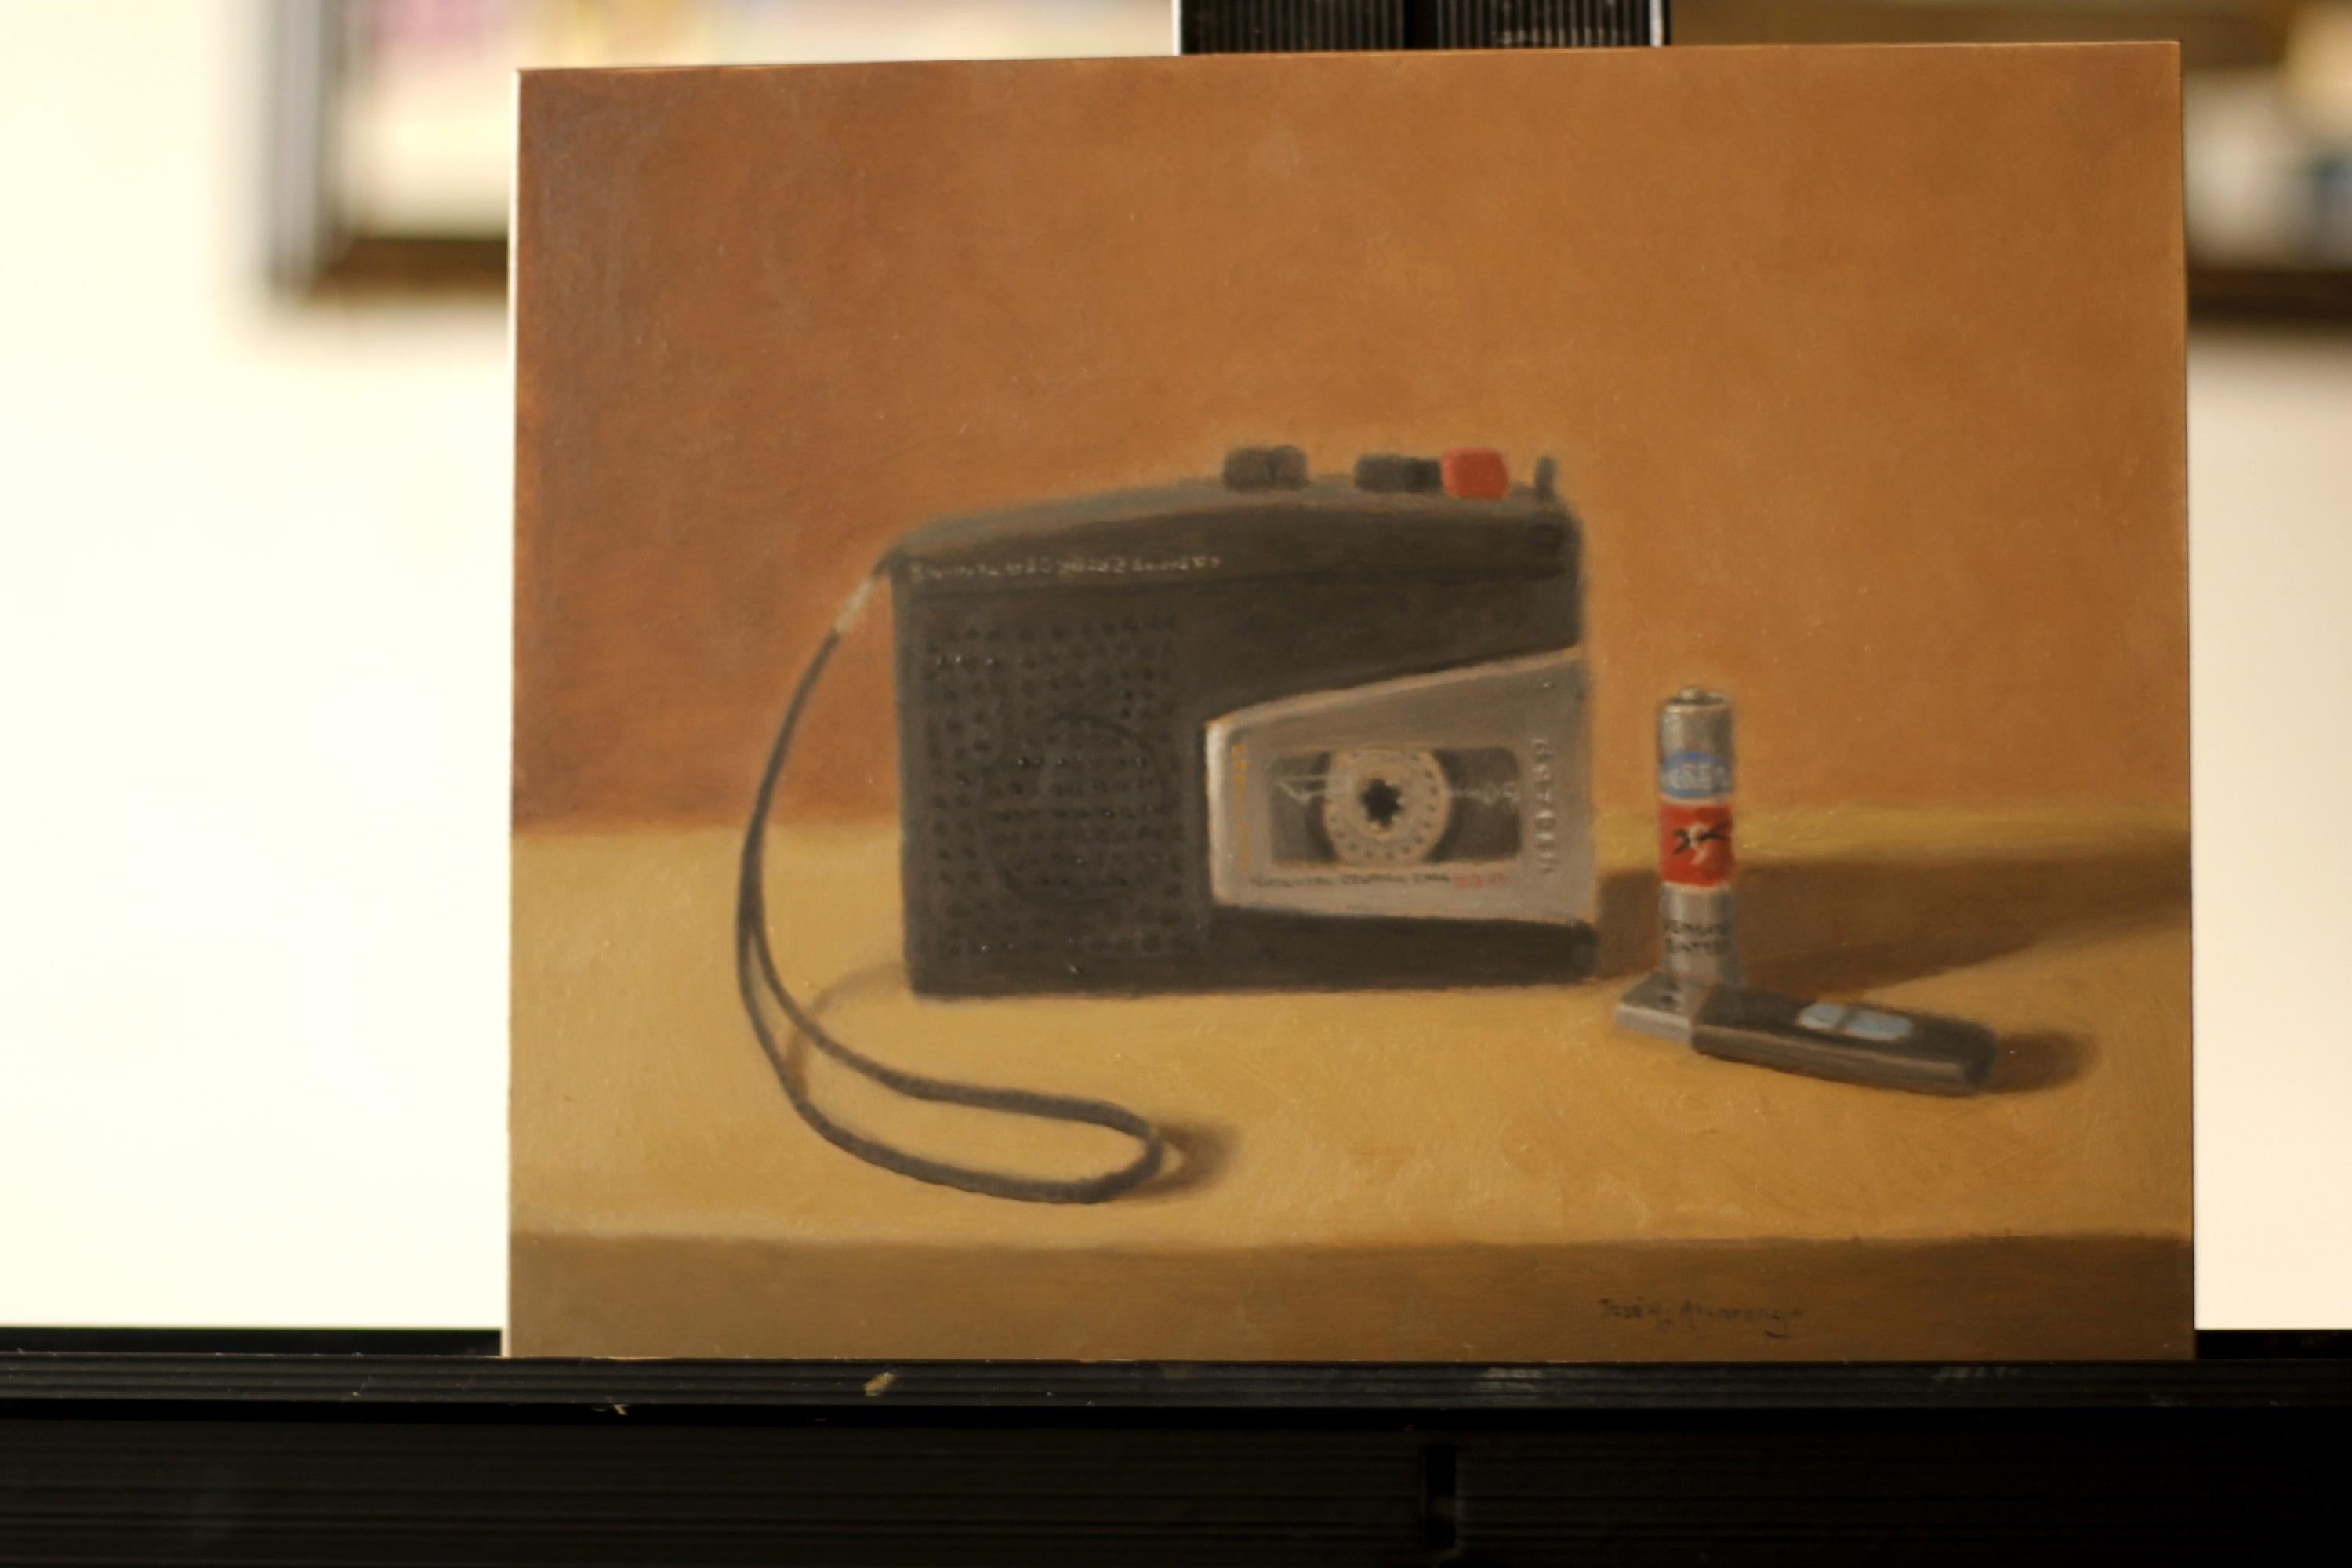 <p>Artist Comments<br />In this piece, I wanted to represent the past and present of technology, juxtaposing the vintage voice recorder and the more modern USB flash drive. On the voice recorder I changed the brand name to Rotceh, which is my middle